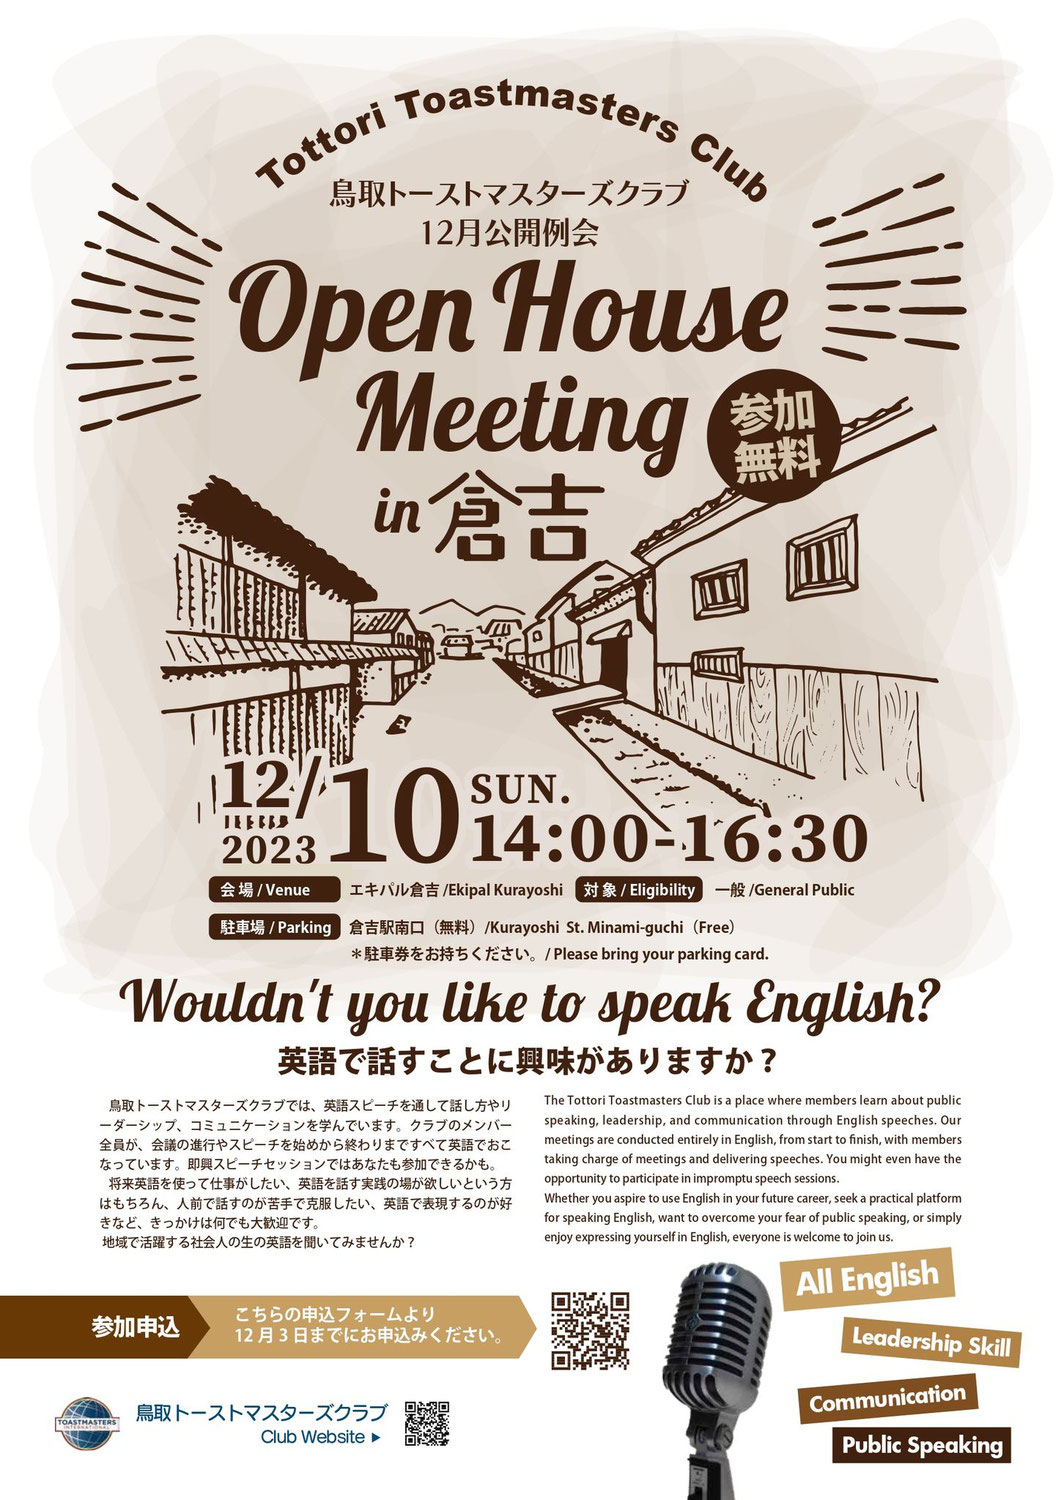 Tottori Toastmasters Club hosts an Open House